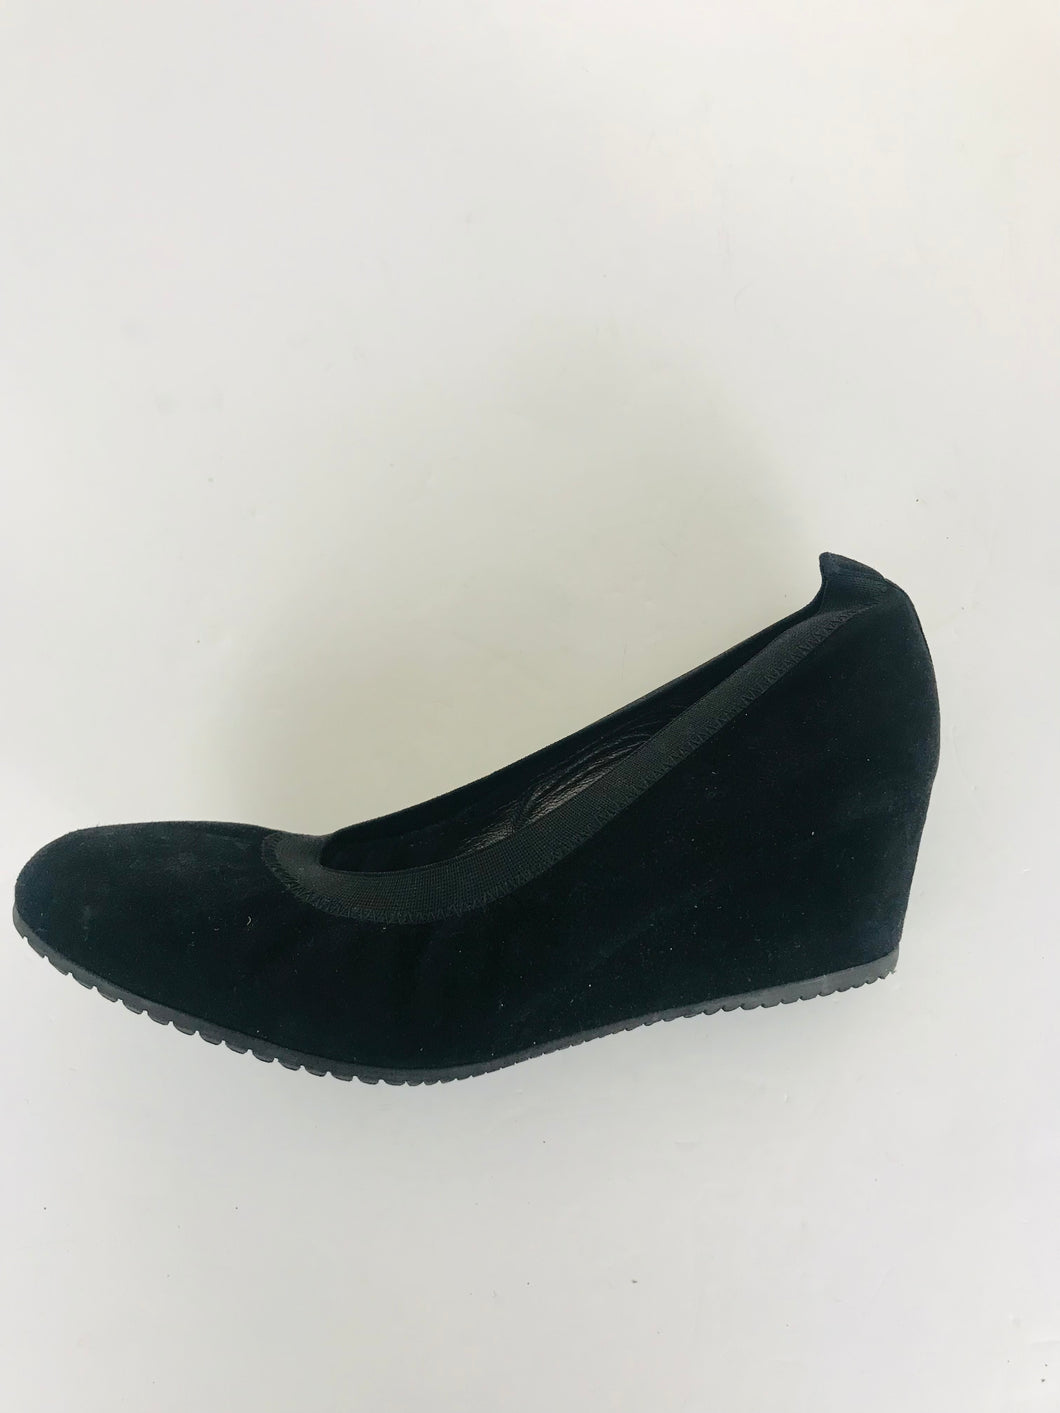 Aquatalia for Russell & Bromley Women's Suede Wedge Court Shoes | EU38.5 | Black